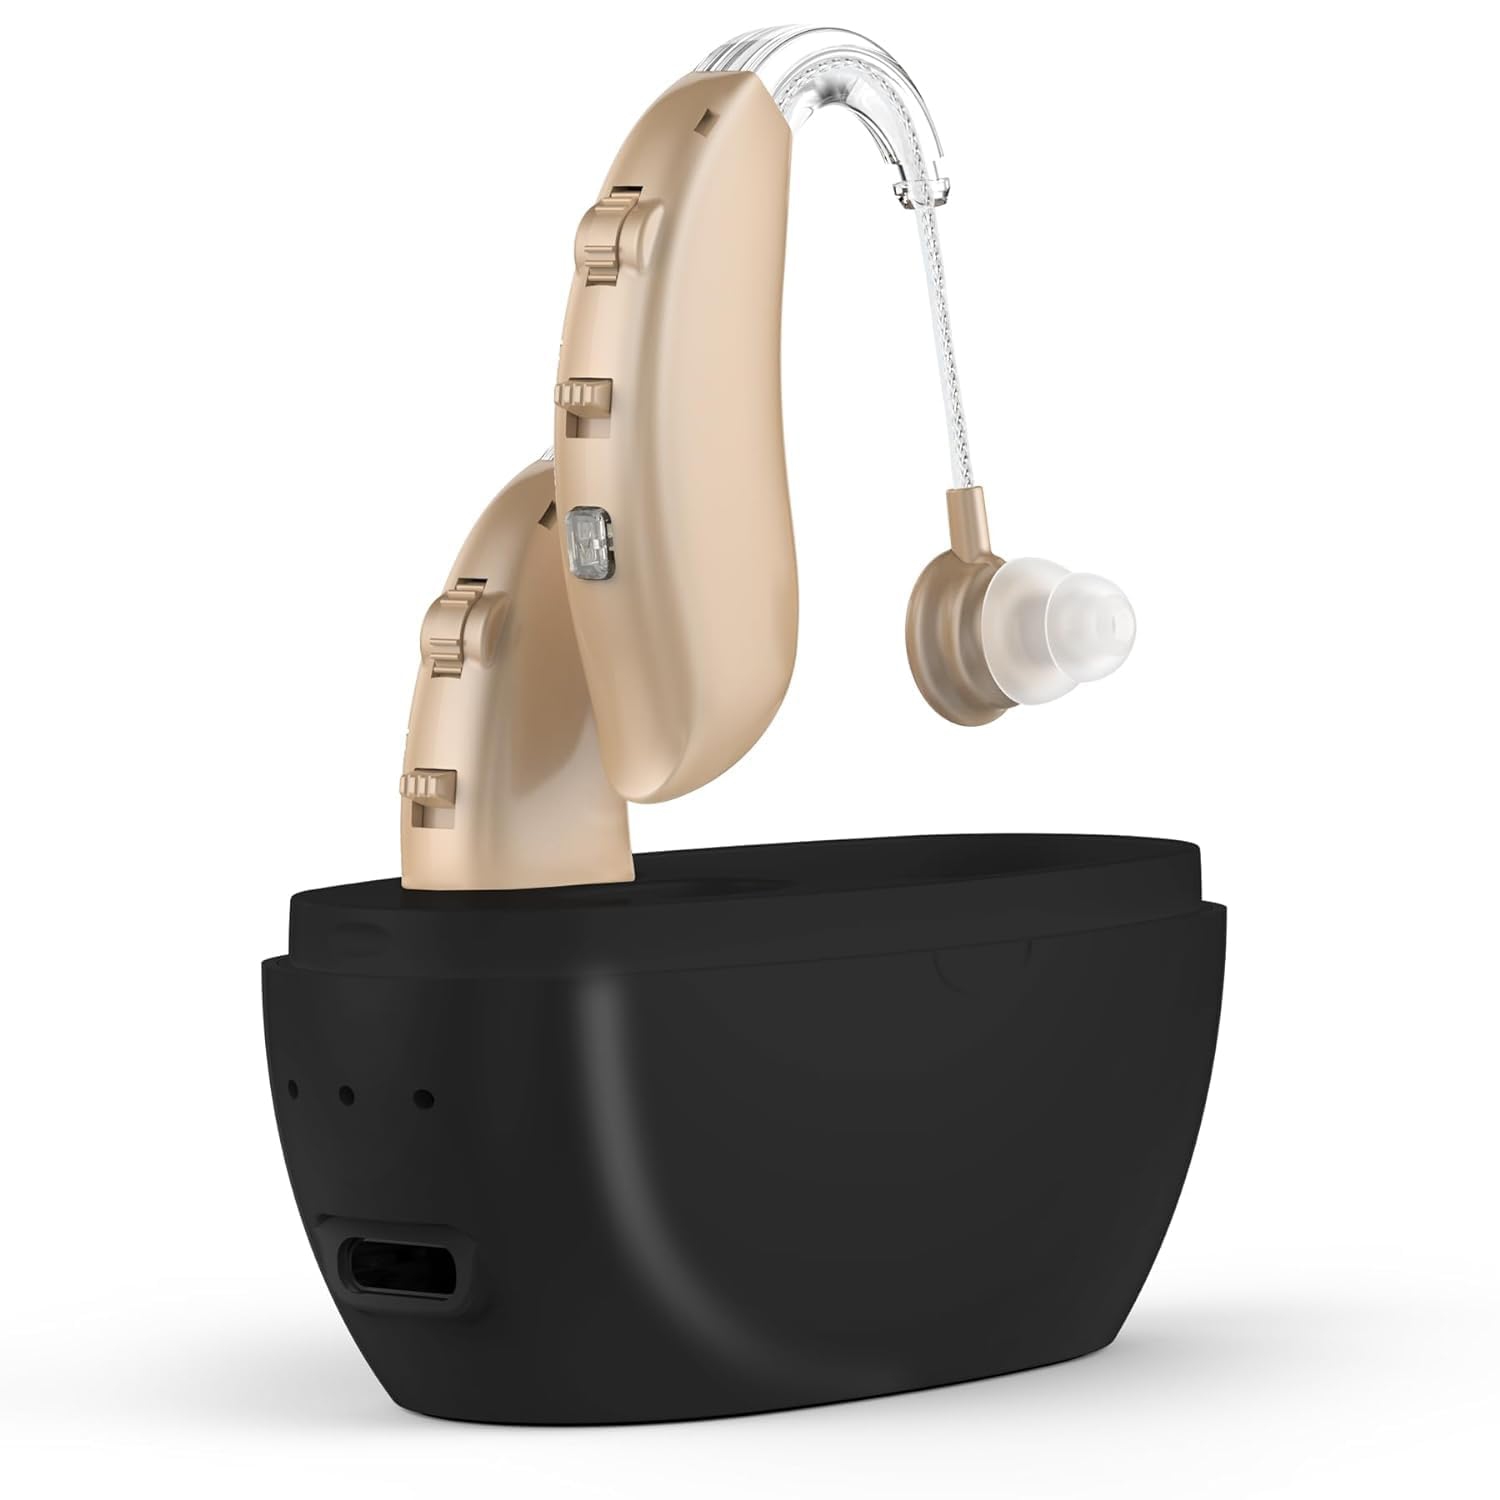 Rechargeable Hearing Aids for Seniors - Bte Digital Hearing Amplifiers W/intelligent Noise Cancelling, Four Modes, Behind Ear Hearing Aid W/volume Control and Charging Case, Beige